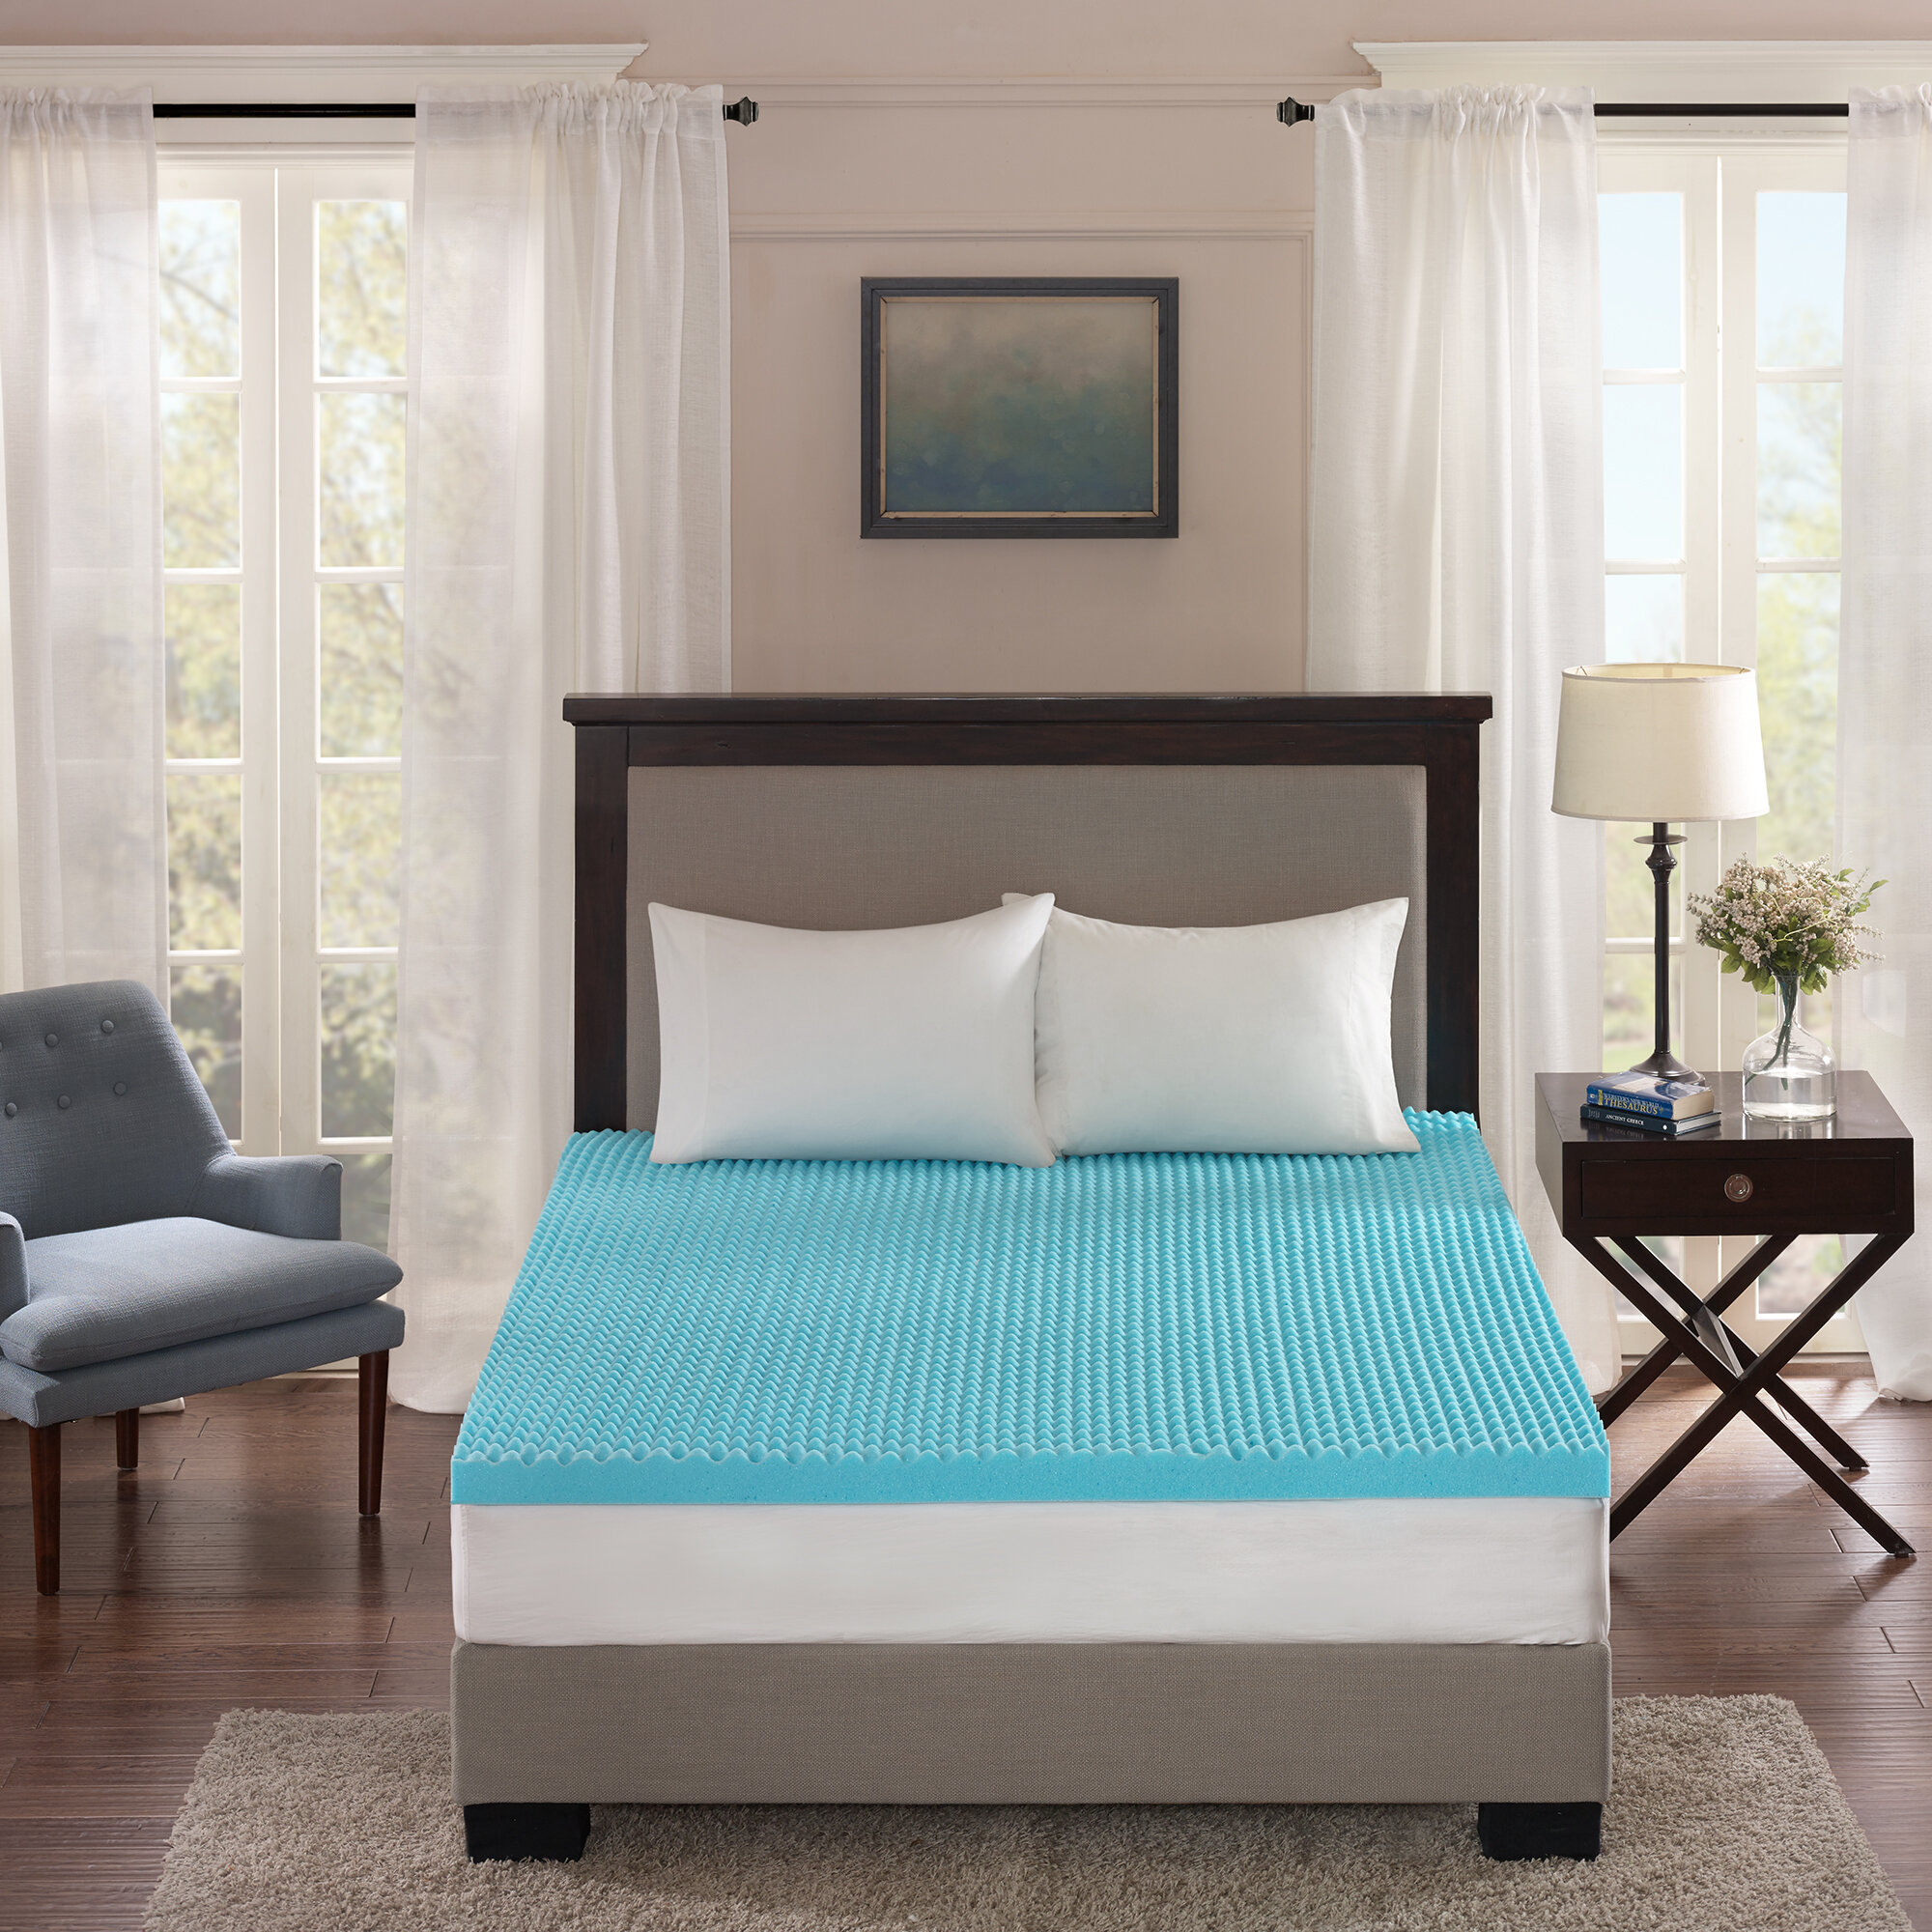 Best Mattresses of 2020 Updated 2020 Reviews‎ Cooling